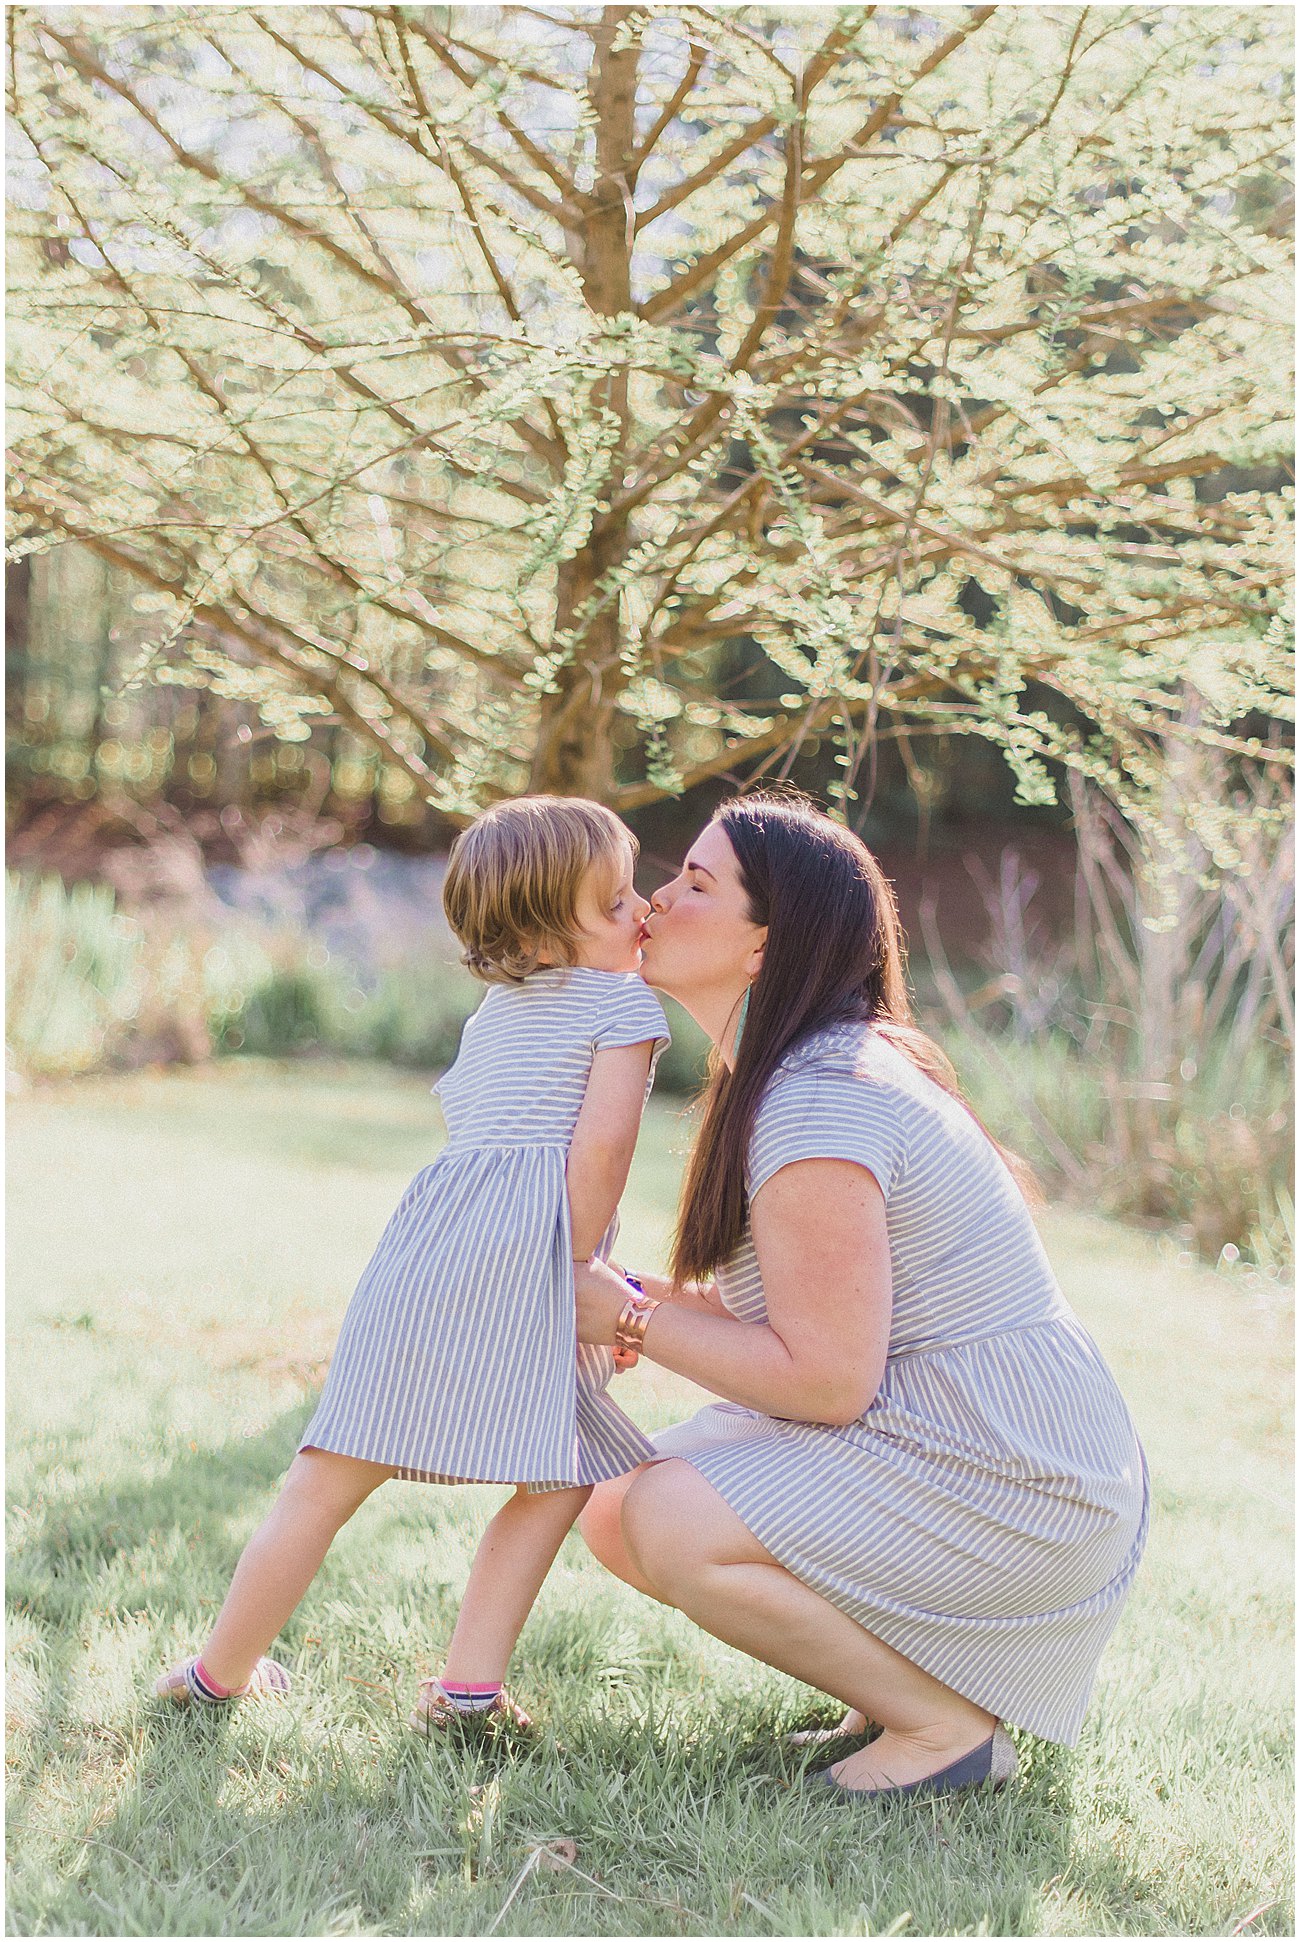 Ethical Mommy & Me Fashion: Elegantees Riley Striped Dress styled by popular North Carolina ethical fashion blogger Still Being Molly